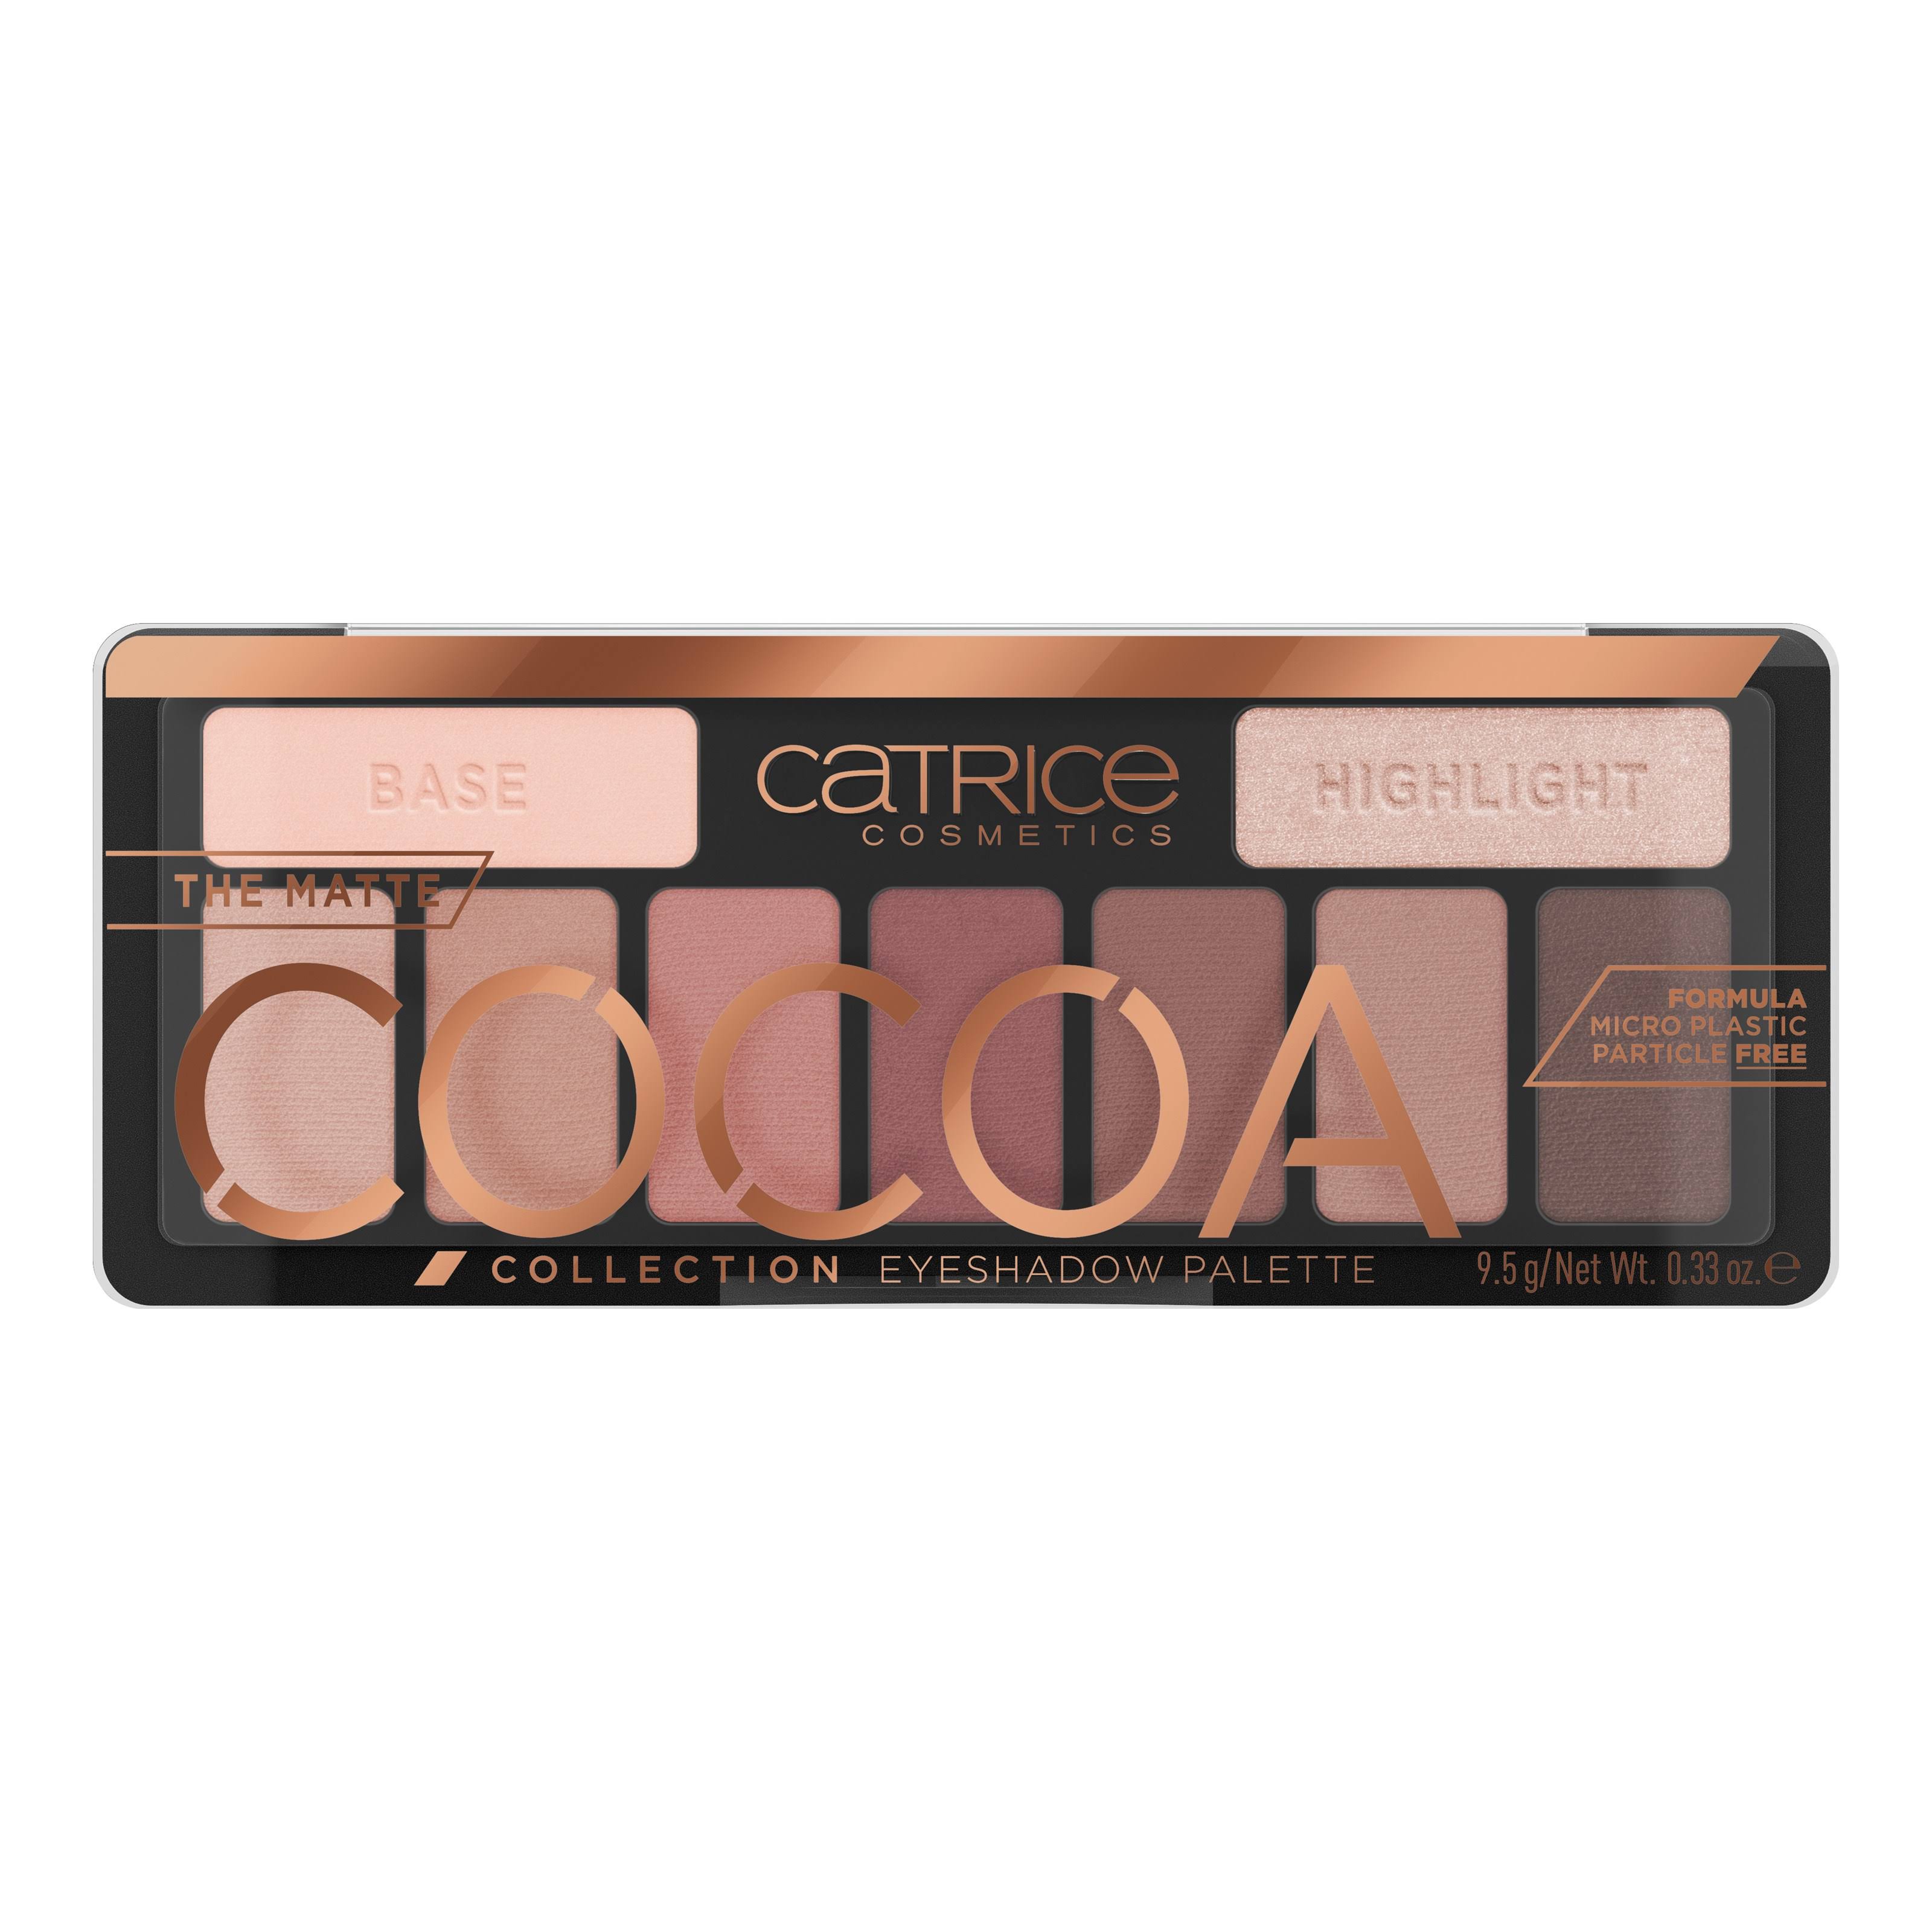 Catrice The Matte Cocoa Collection Eyeshadow Palette 010 9.5g (0.34oz)